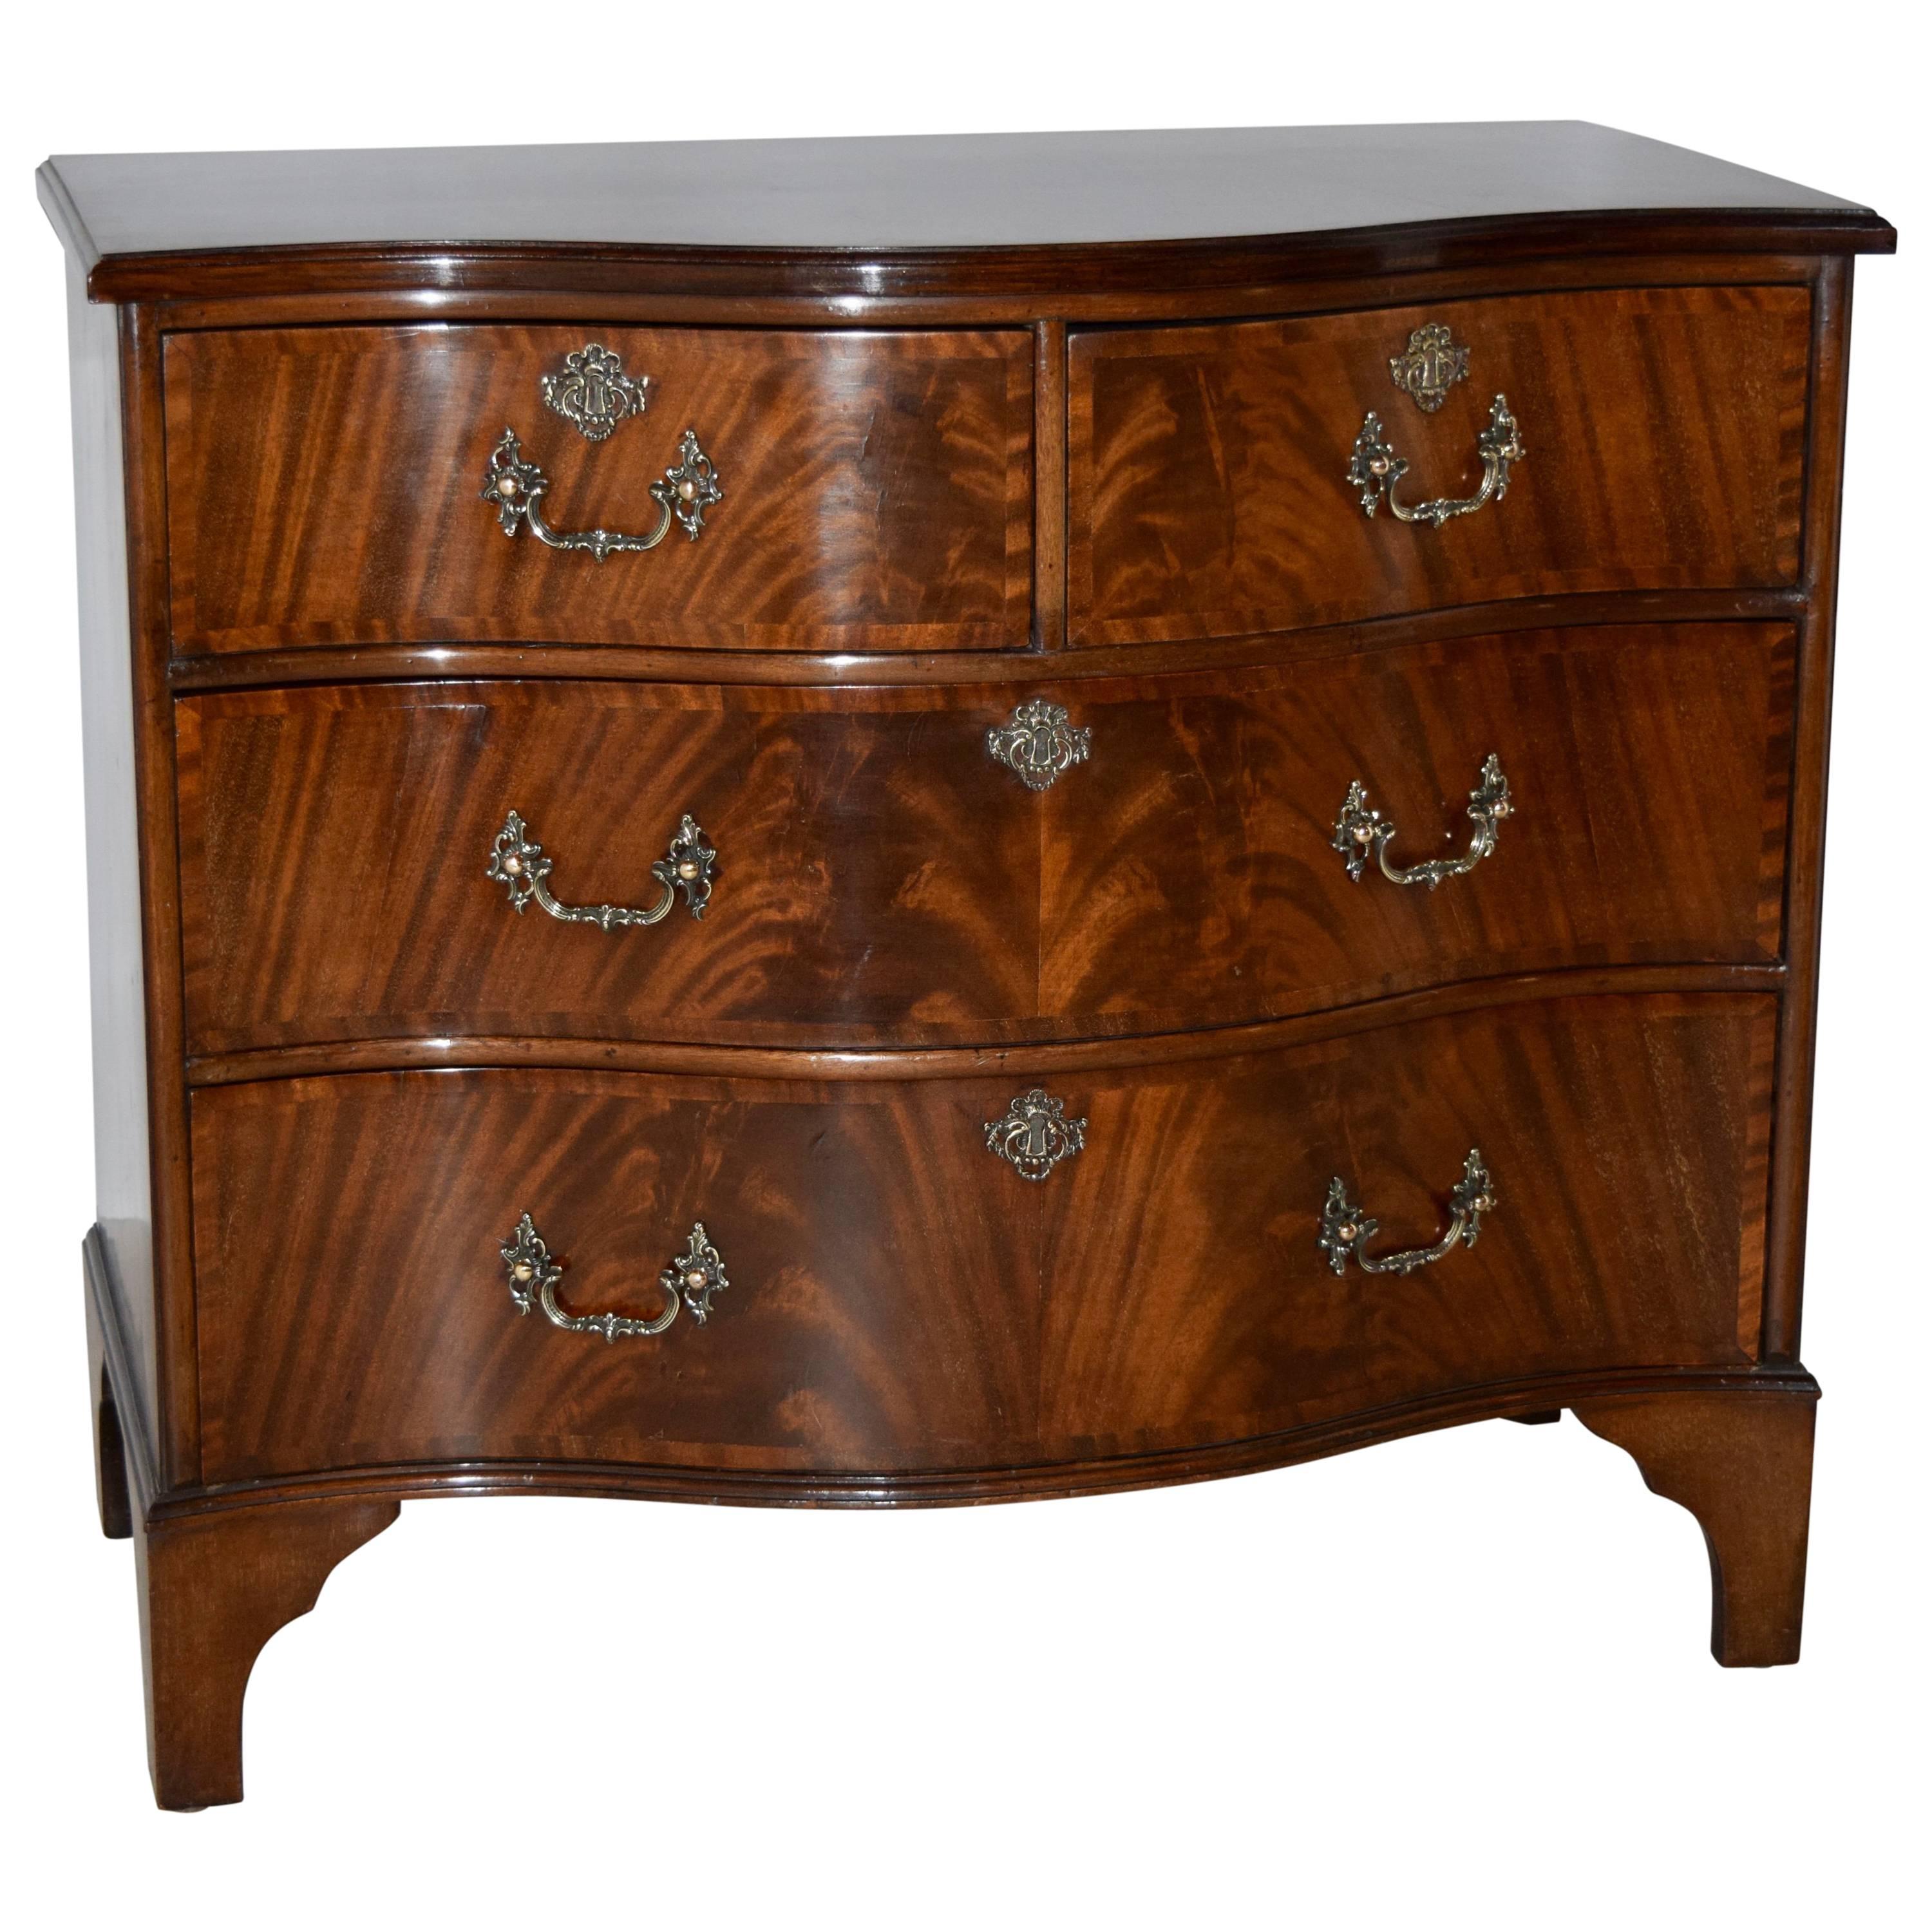 Early 20th Century Serpentine Chest of Drawers